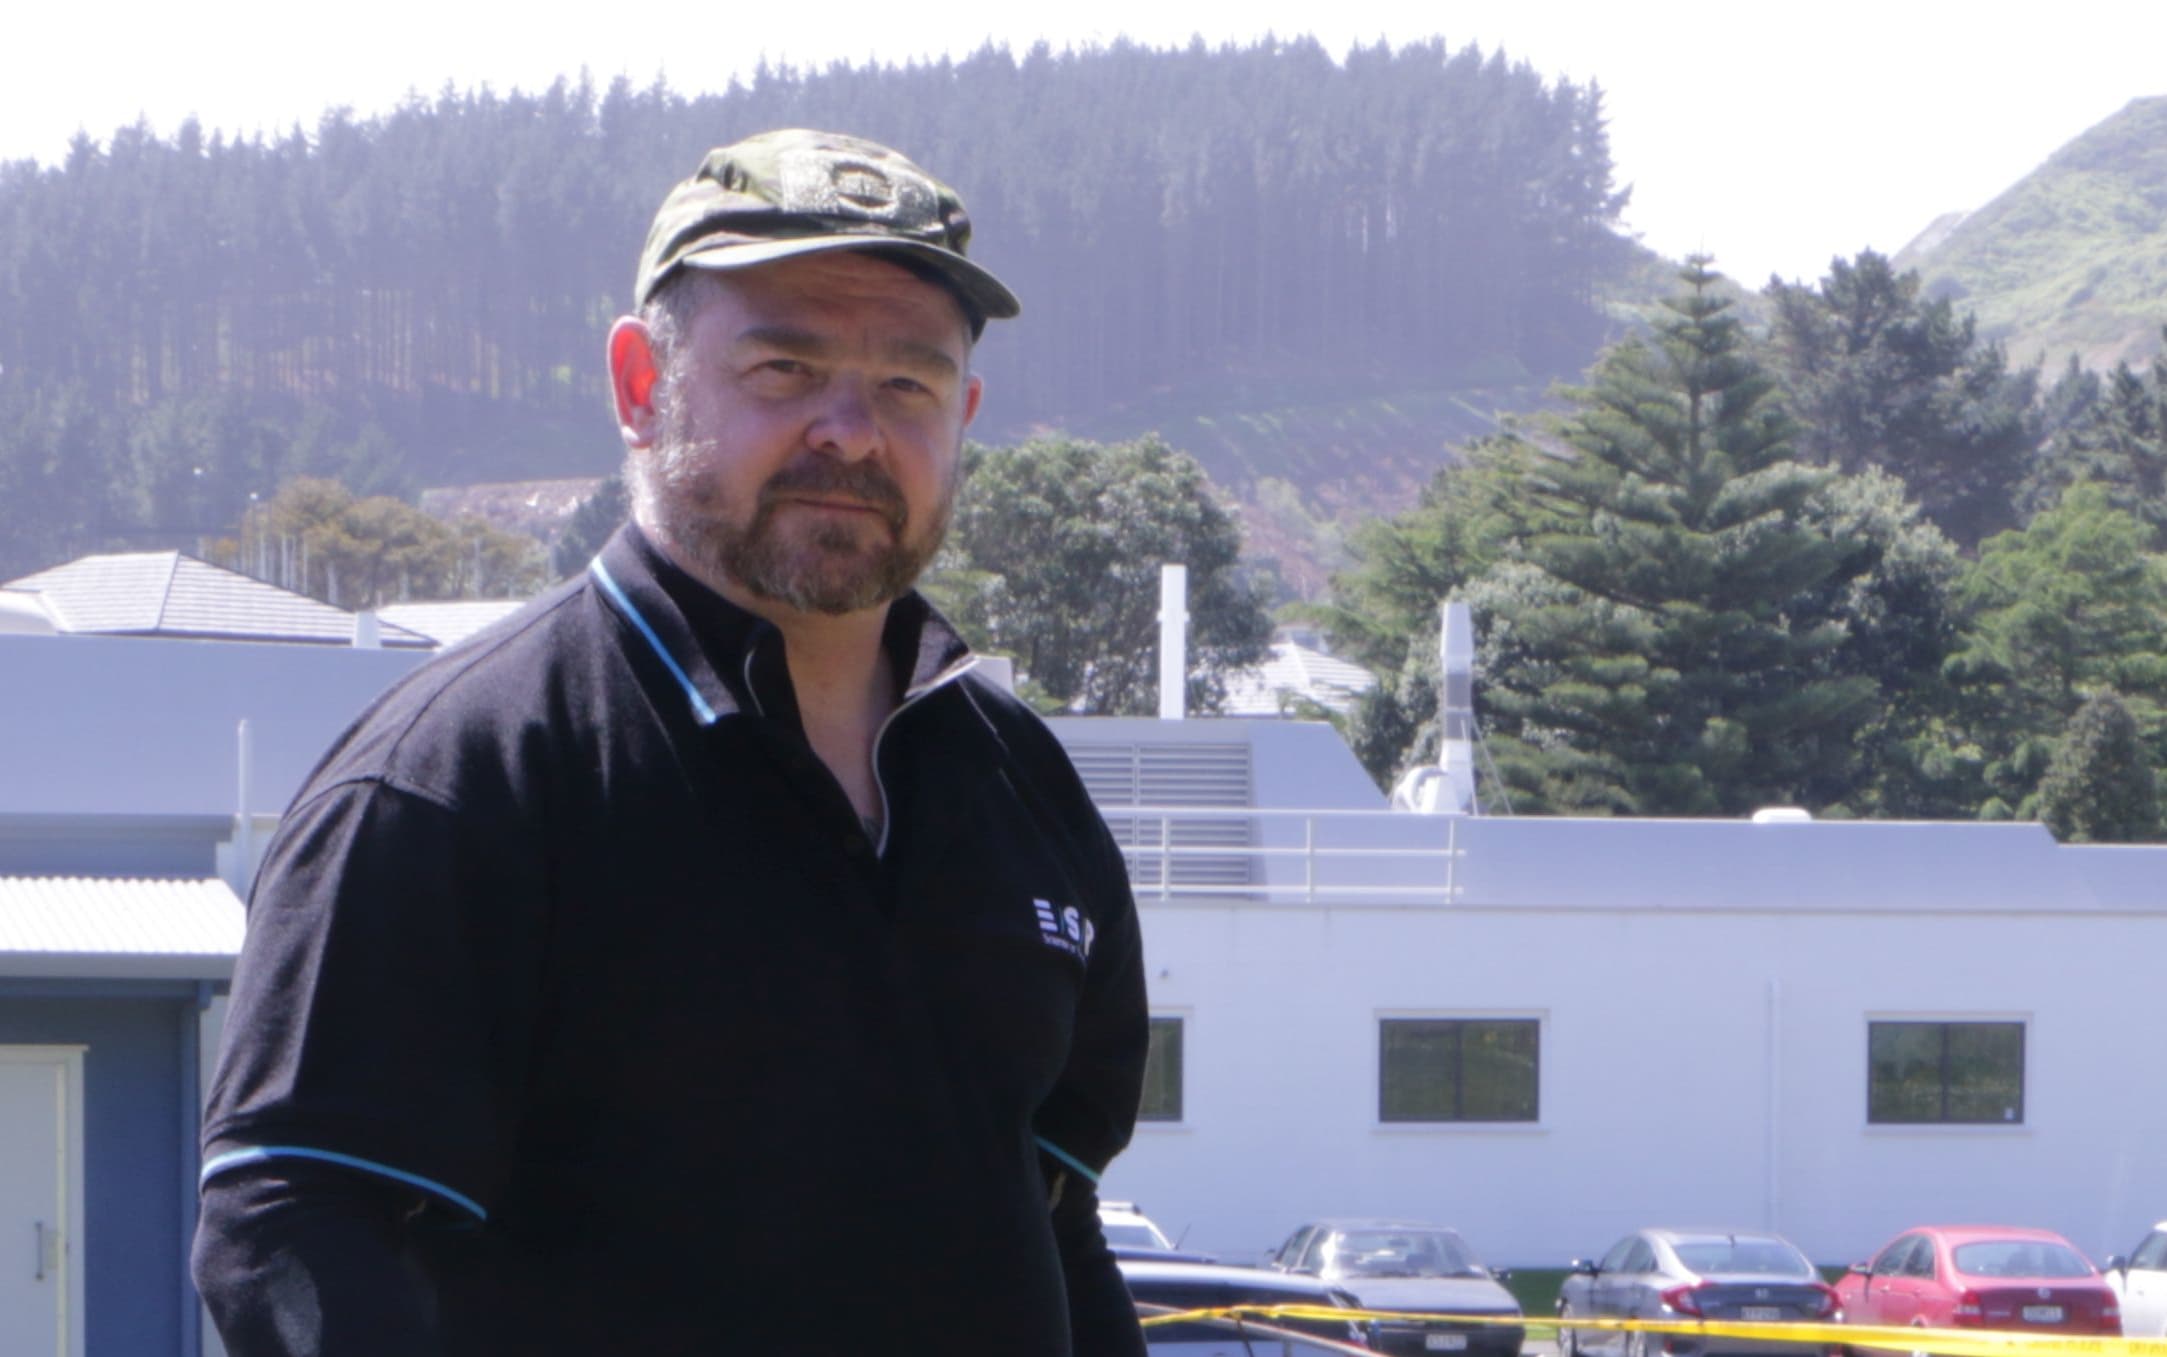 Rian Morgan-Smith is forensic senior scientist and crime scene technical leader at Institute of Environmental Science and Research (ESR) in Porirua